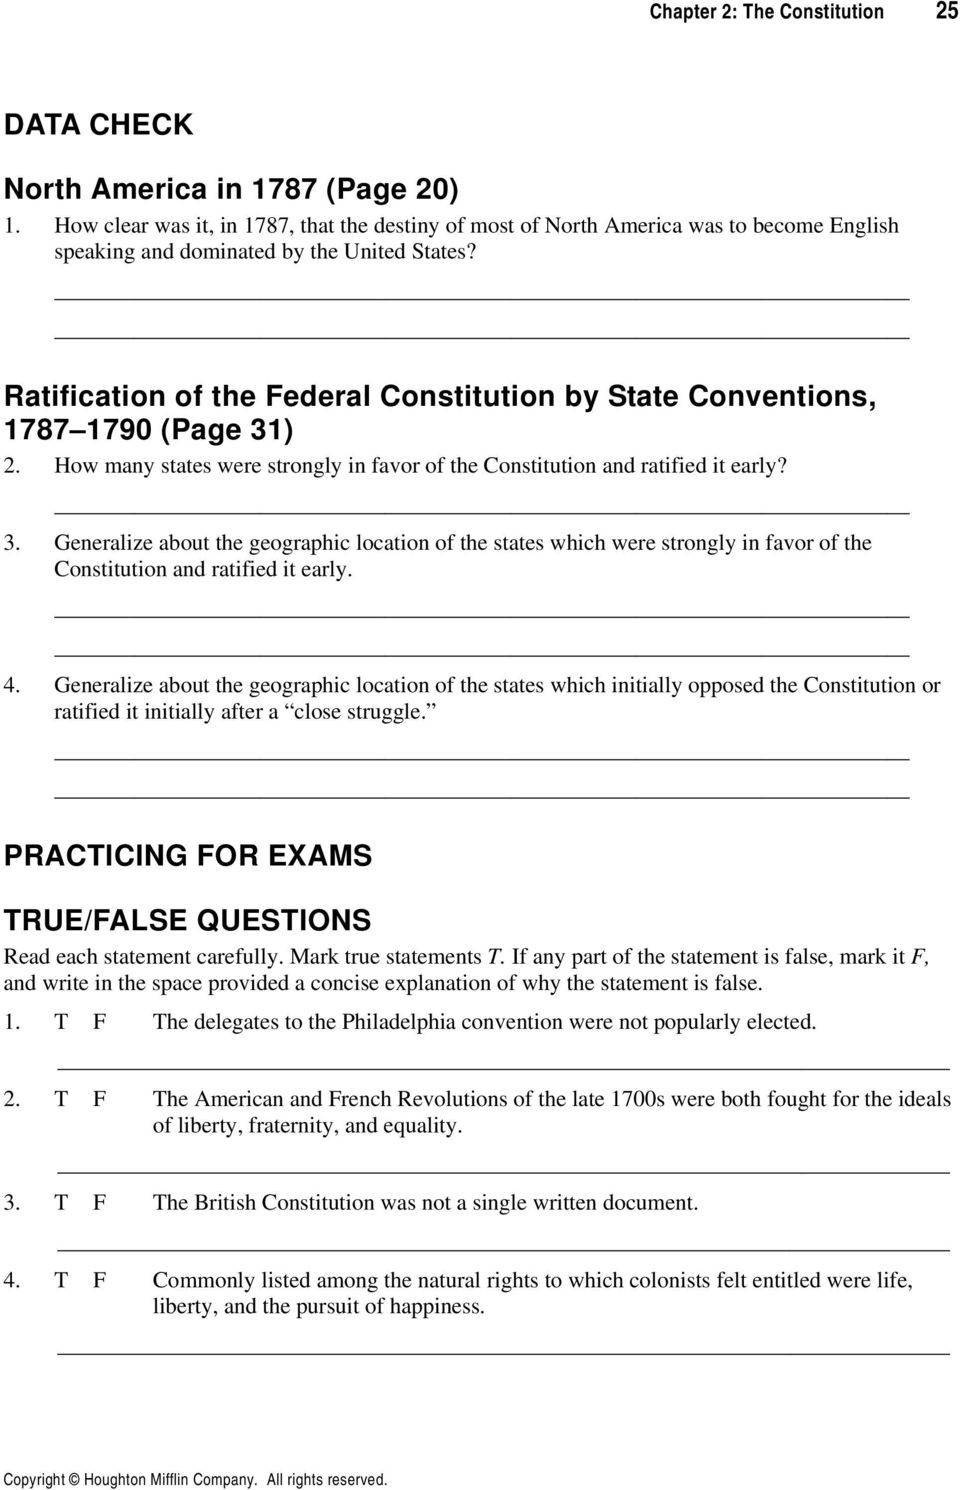 Ratifying the Constitution Worksheet Answers Ratifying the Constitution Worksheet Nidecmege